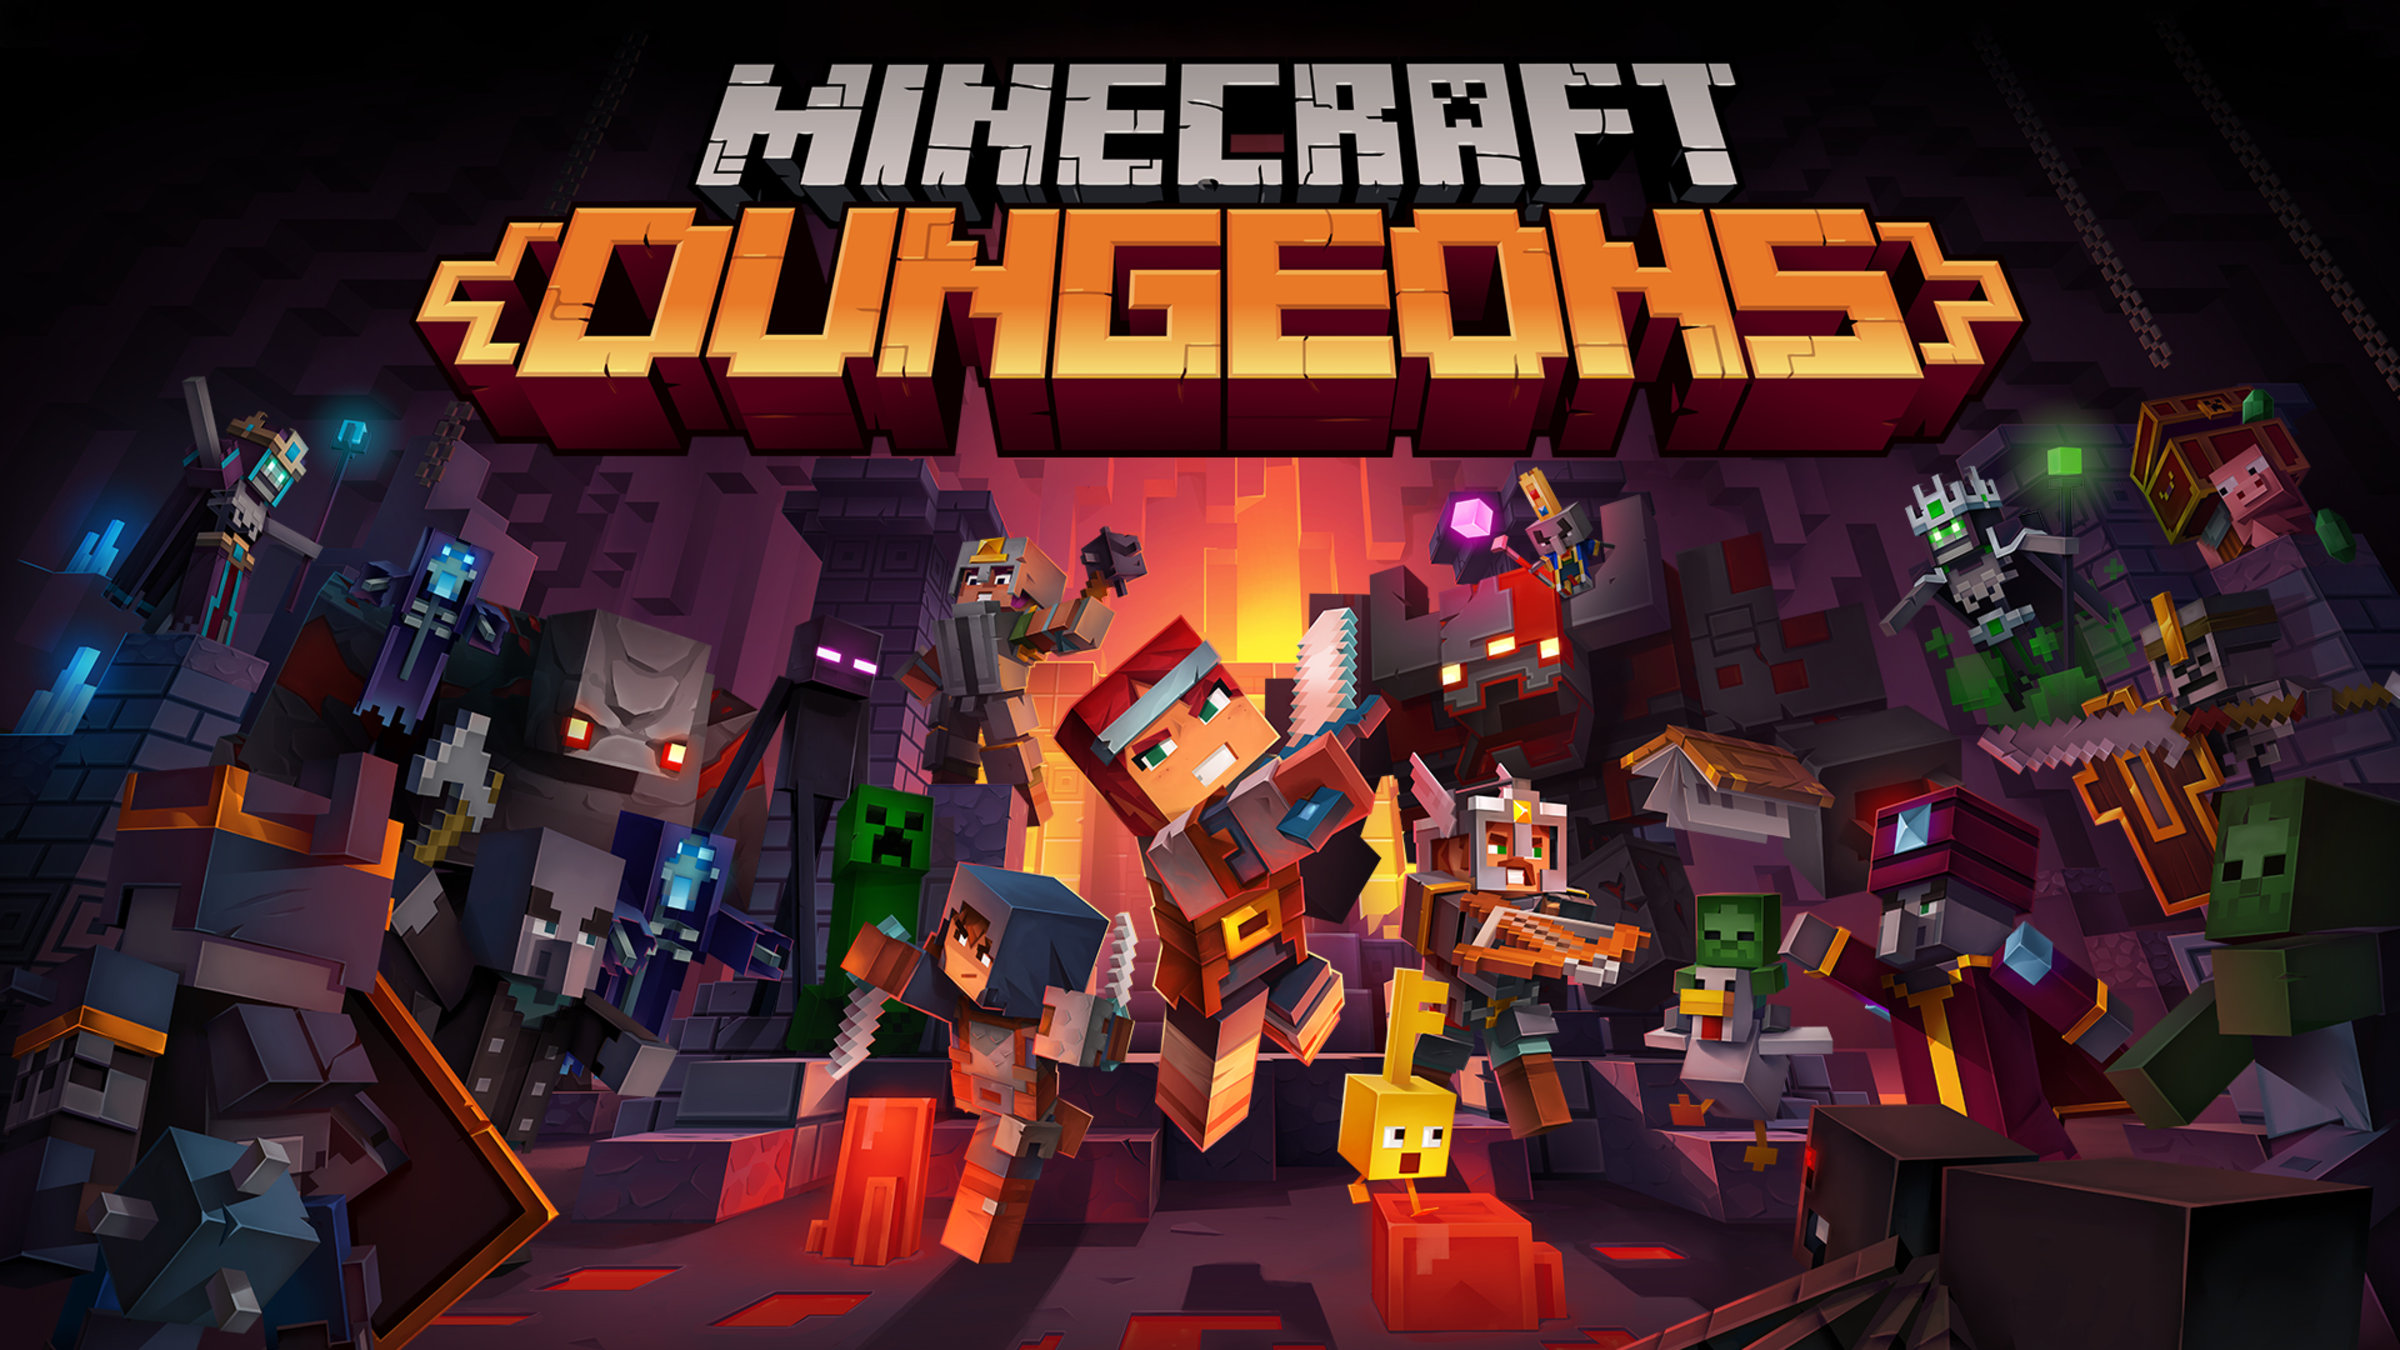 pint Cater Millimeter Minecraft Dungeons for Nintendo Switch - Nintendo Official Site